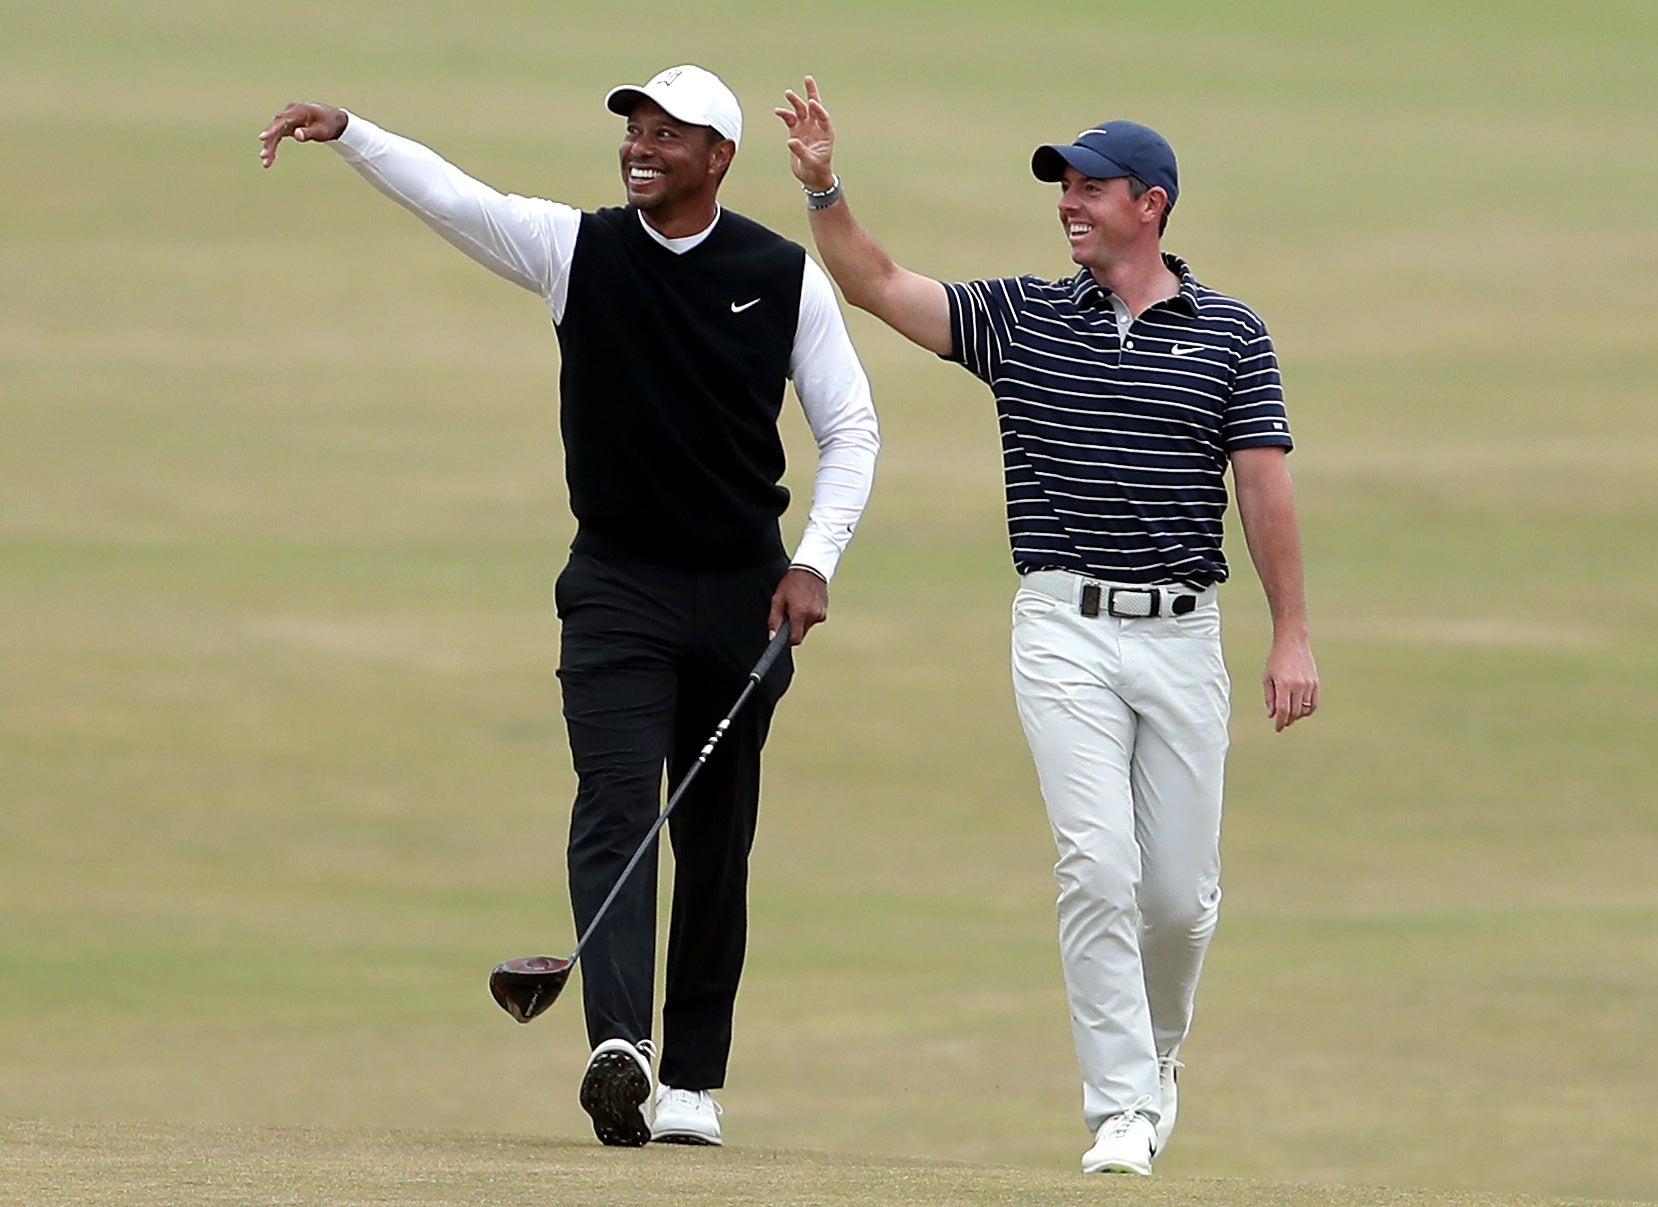 Tiger Woods (left) and Rory McIlroy on the 18th fairway during the R&A Celebration of Champions event at the Old Course, St Andrews (Richard Sellers/PA)